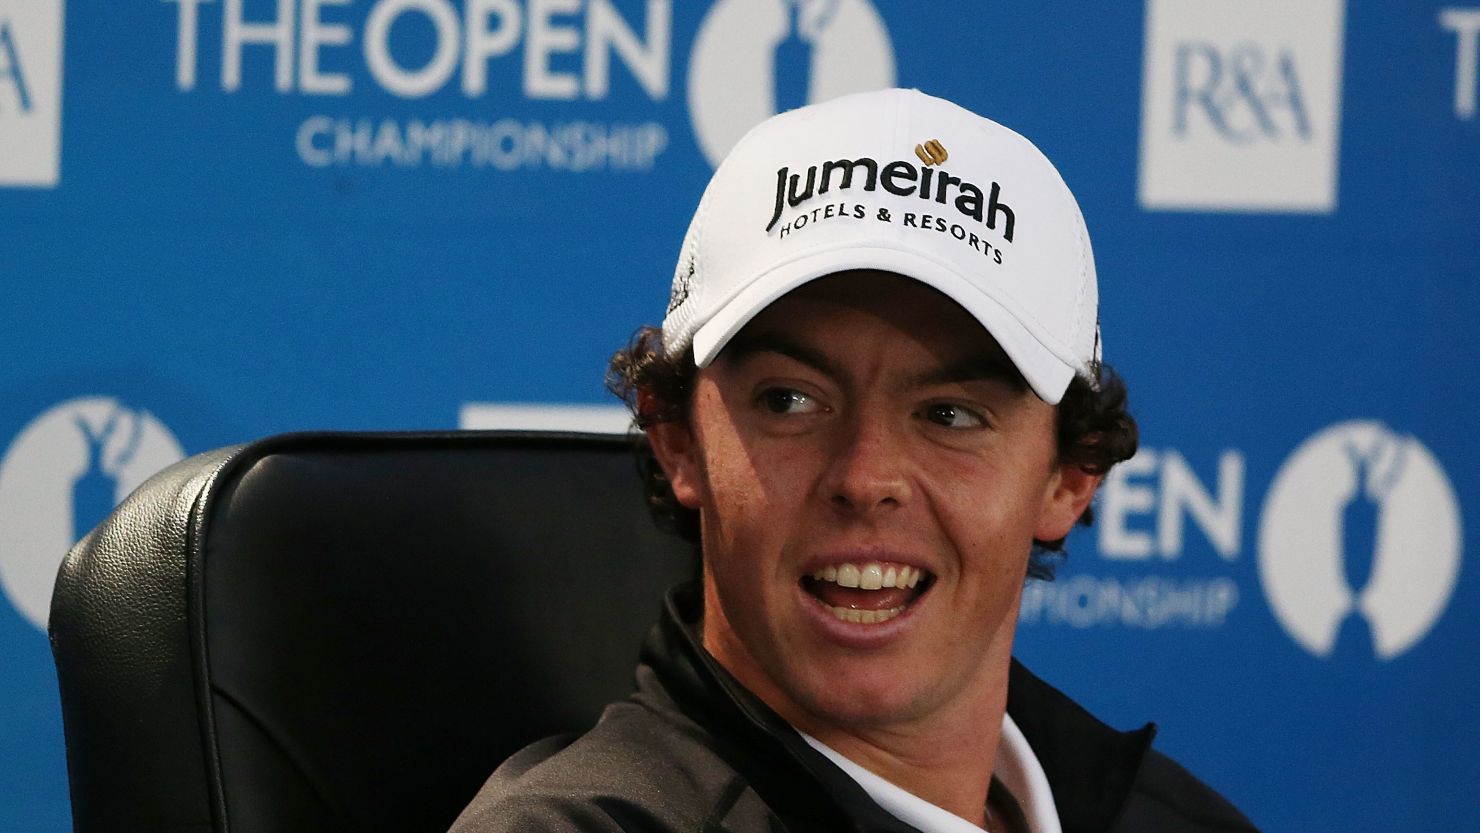 Rory McIlroy is in a much more relaxed mood going into the British Open than 12 months ago, he says